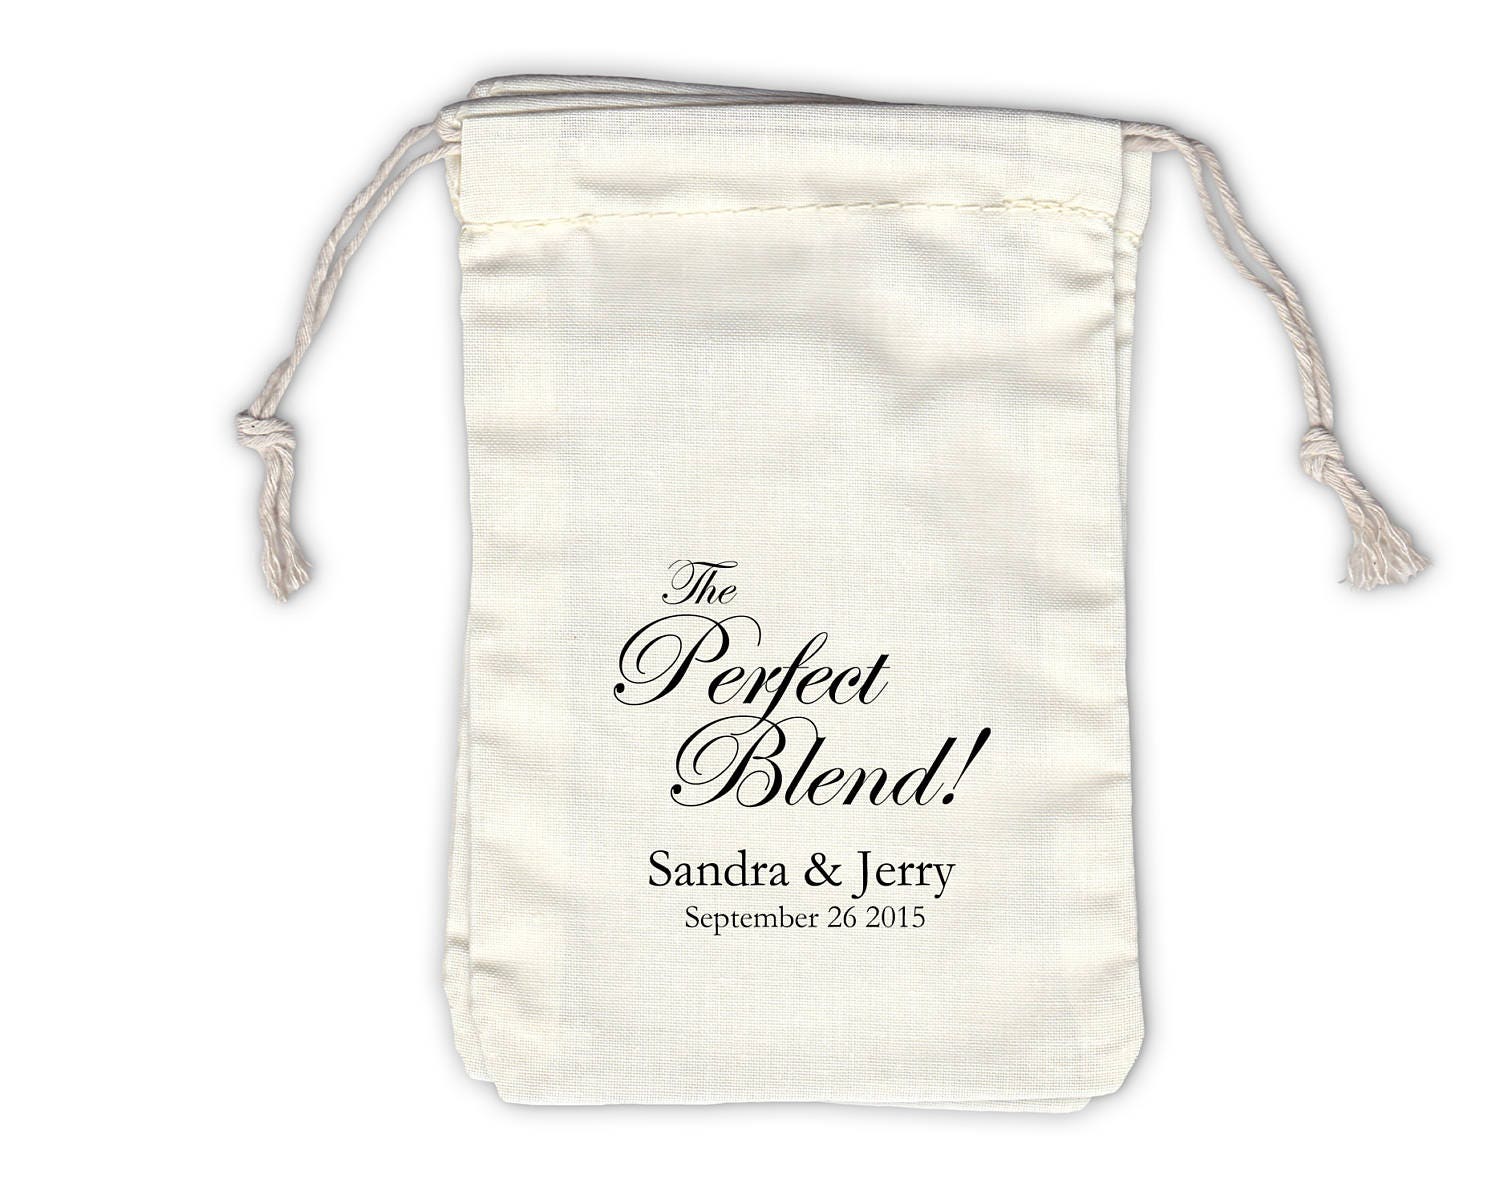 The Perfect Blend Personalized Cotton Bags For Coffee Or Tea Wedding Favors in Black - Ivory Fabric Drawstring Set Of 12 | 1020